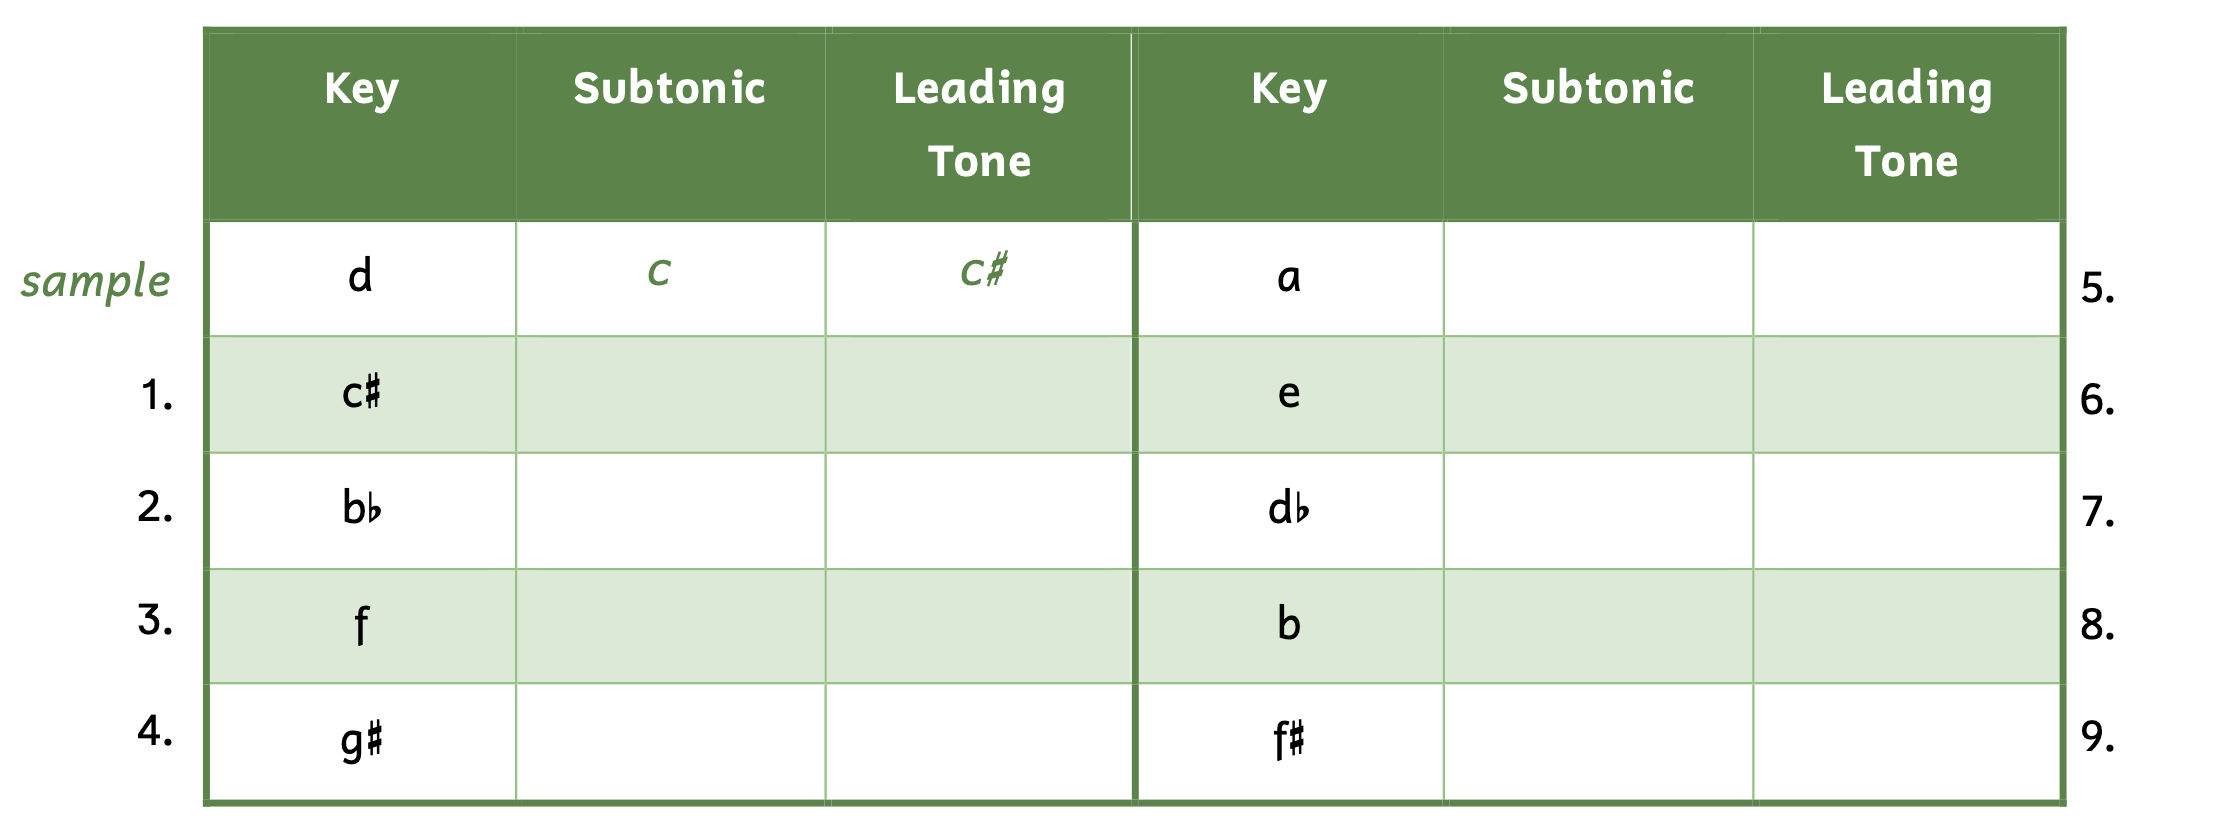 The first column gives you the key. The second column asks for that key's subtonic. The third column asks for that key's leading tone. The sample shows that D minor's subtonic is C and leading tone is C-sharp. Number 1, C-sharp minor. Number 2, B-flat minor. Number 3, F minor. Number 4, G-sharp minor. Number 5, A minor. Number 6, E minor. Number 7, D-flat minor. Number 8, B minor. Number 9, F-sharp minor.